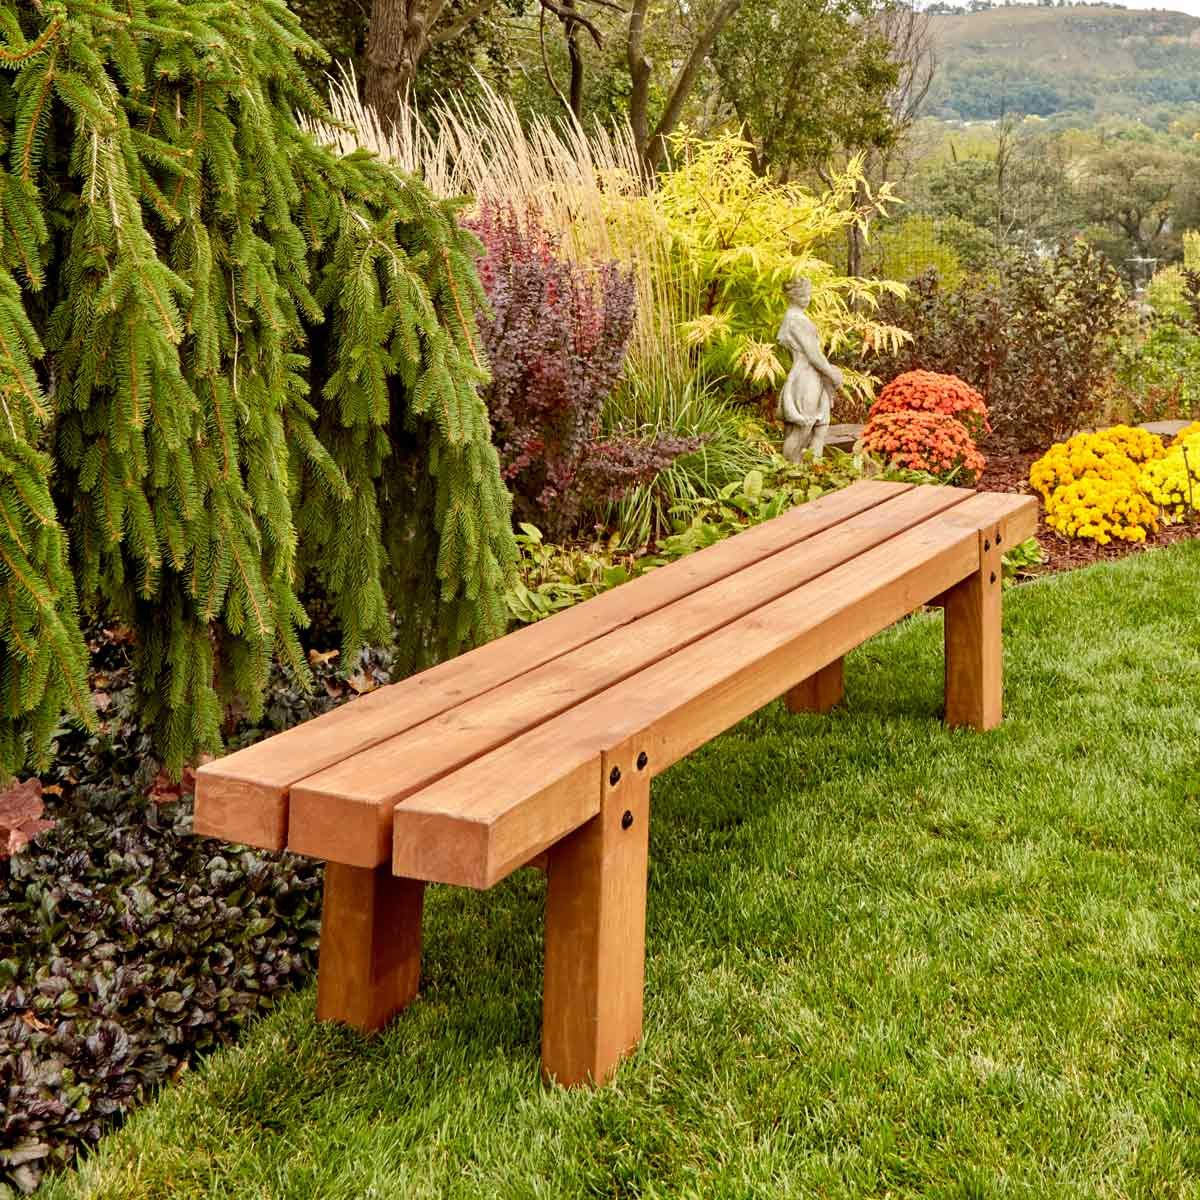 40 Outdoor Woodworking Projects for Beginners â The Family Handyman